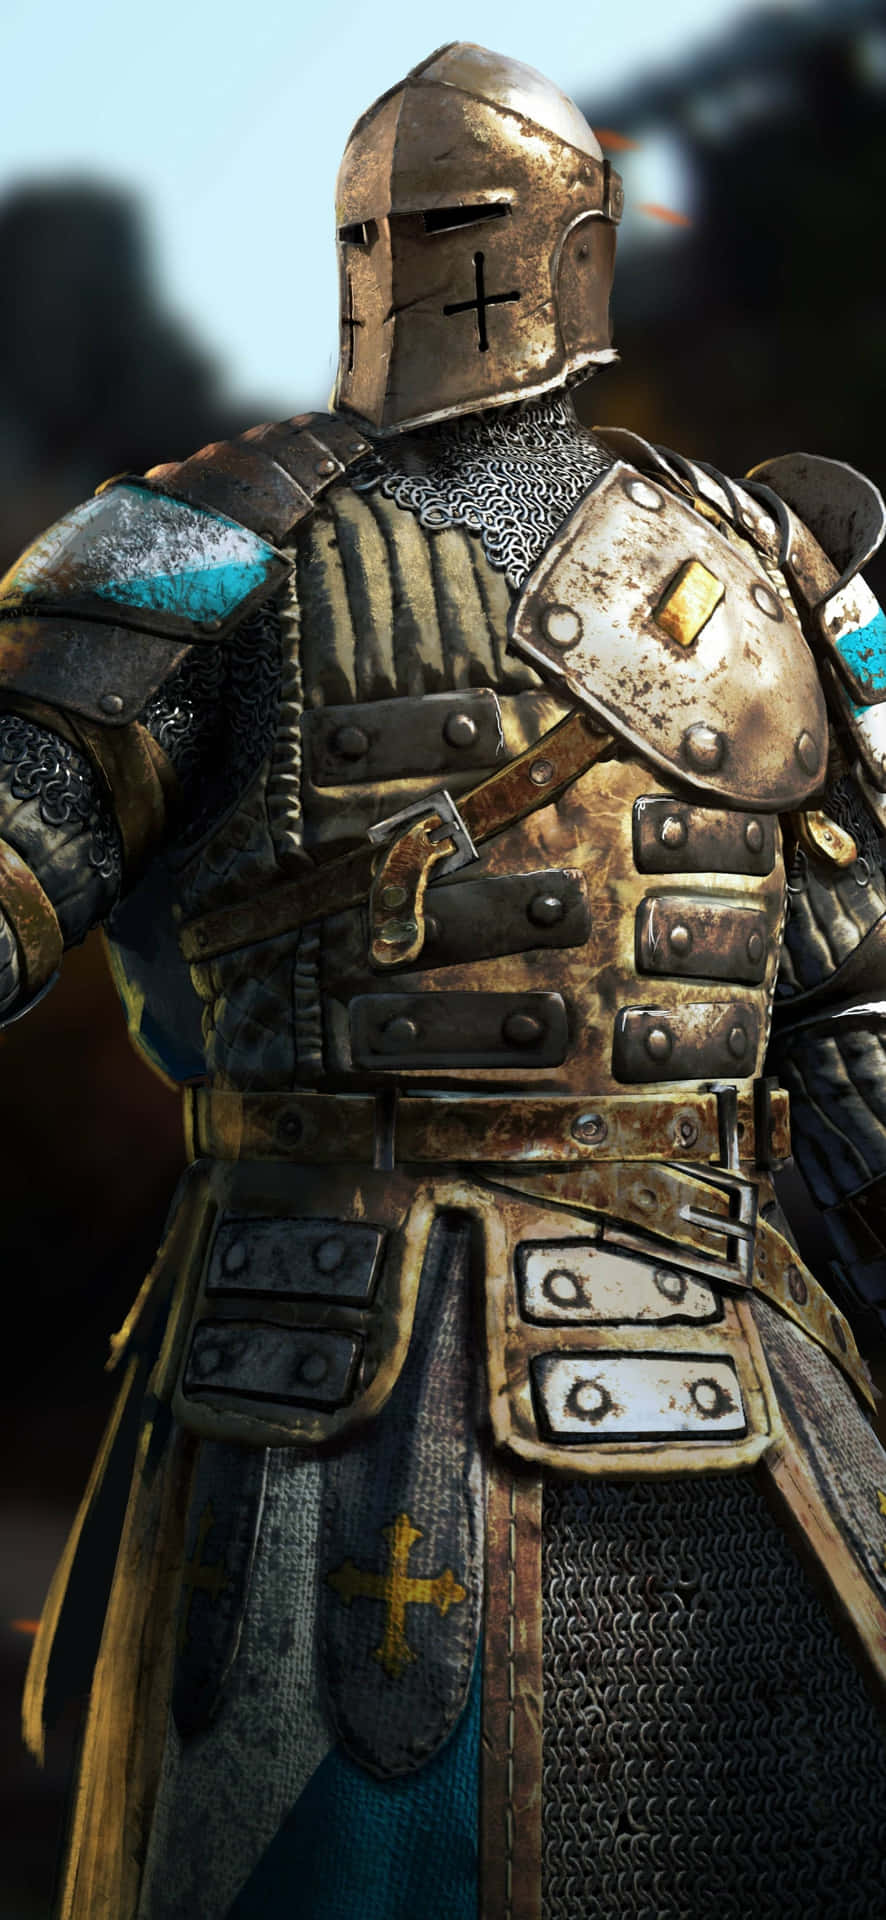 Storm the battlefield as Warden in For Honor Wallpaper